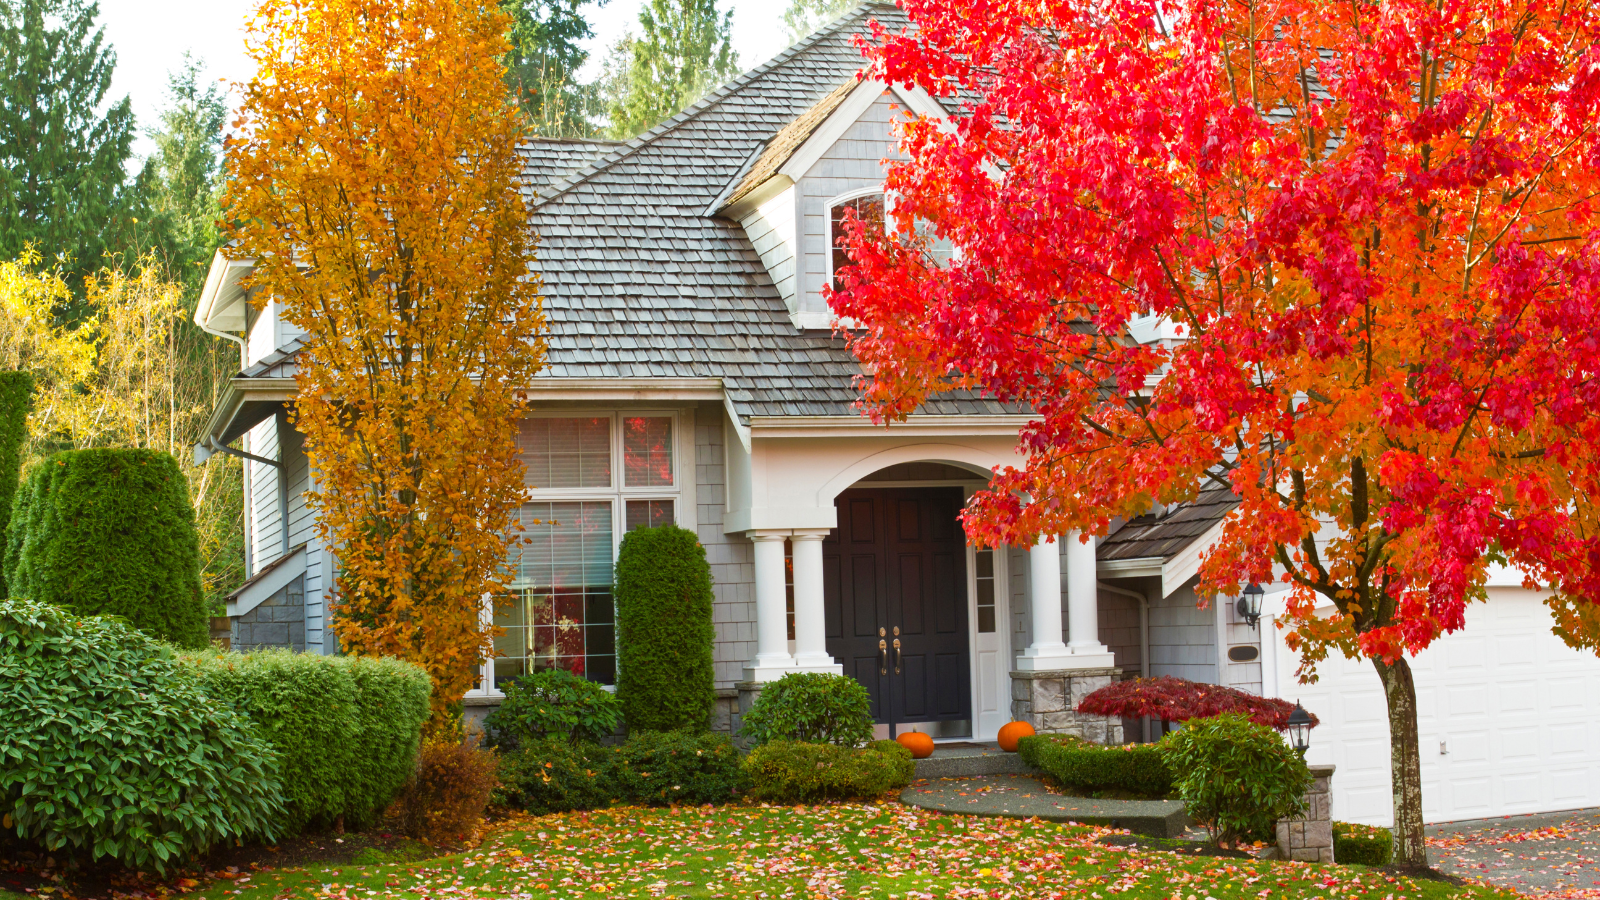 Pierce Refrigeration gives homeowners tips on how to have their HVAC system ready for fall weather.